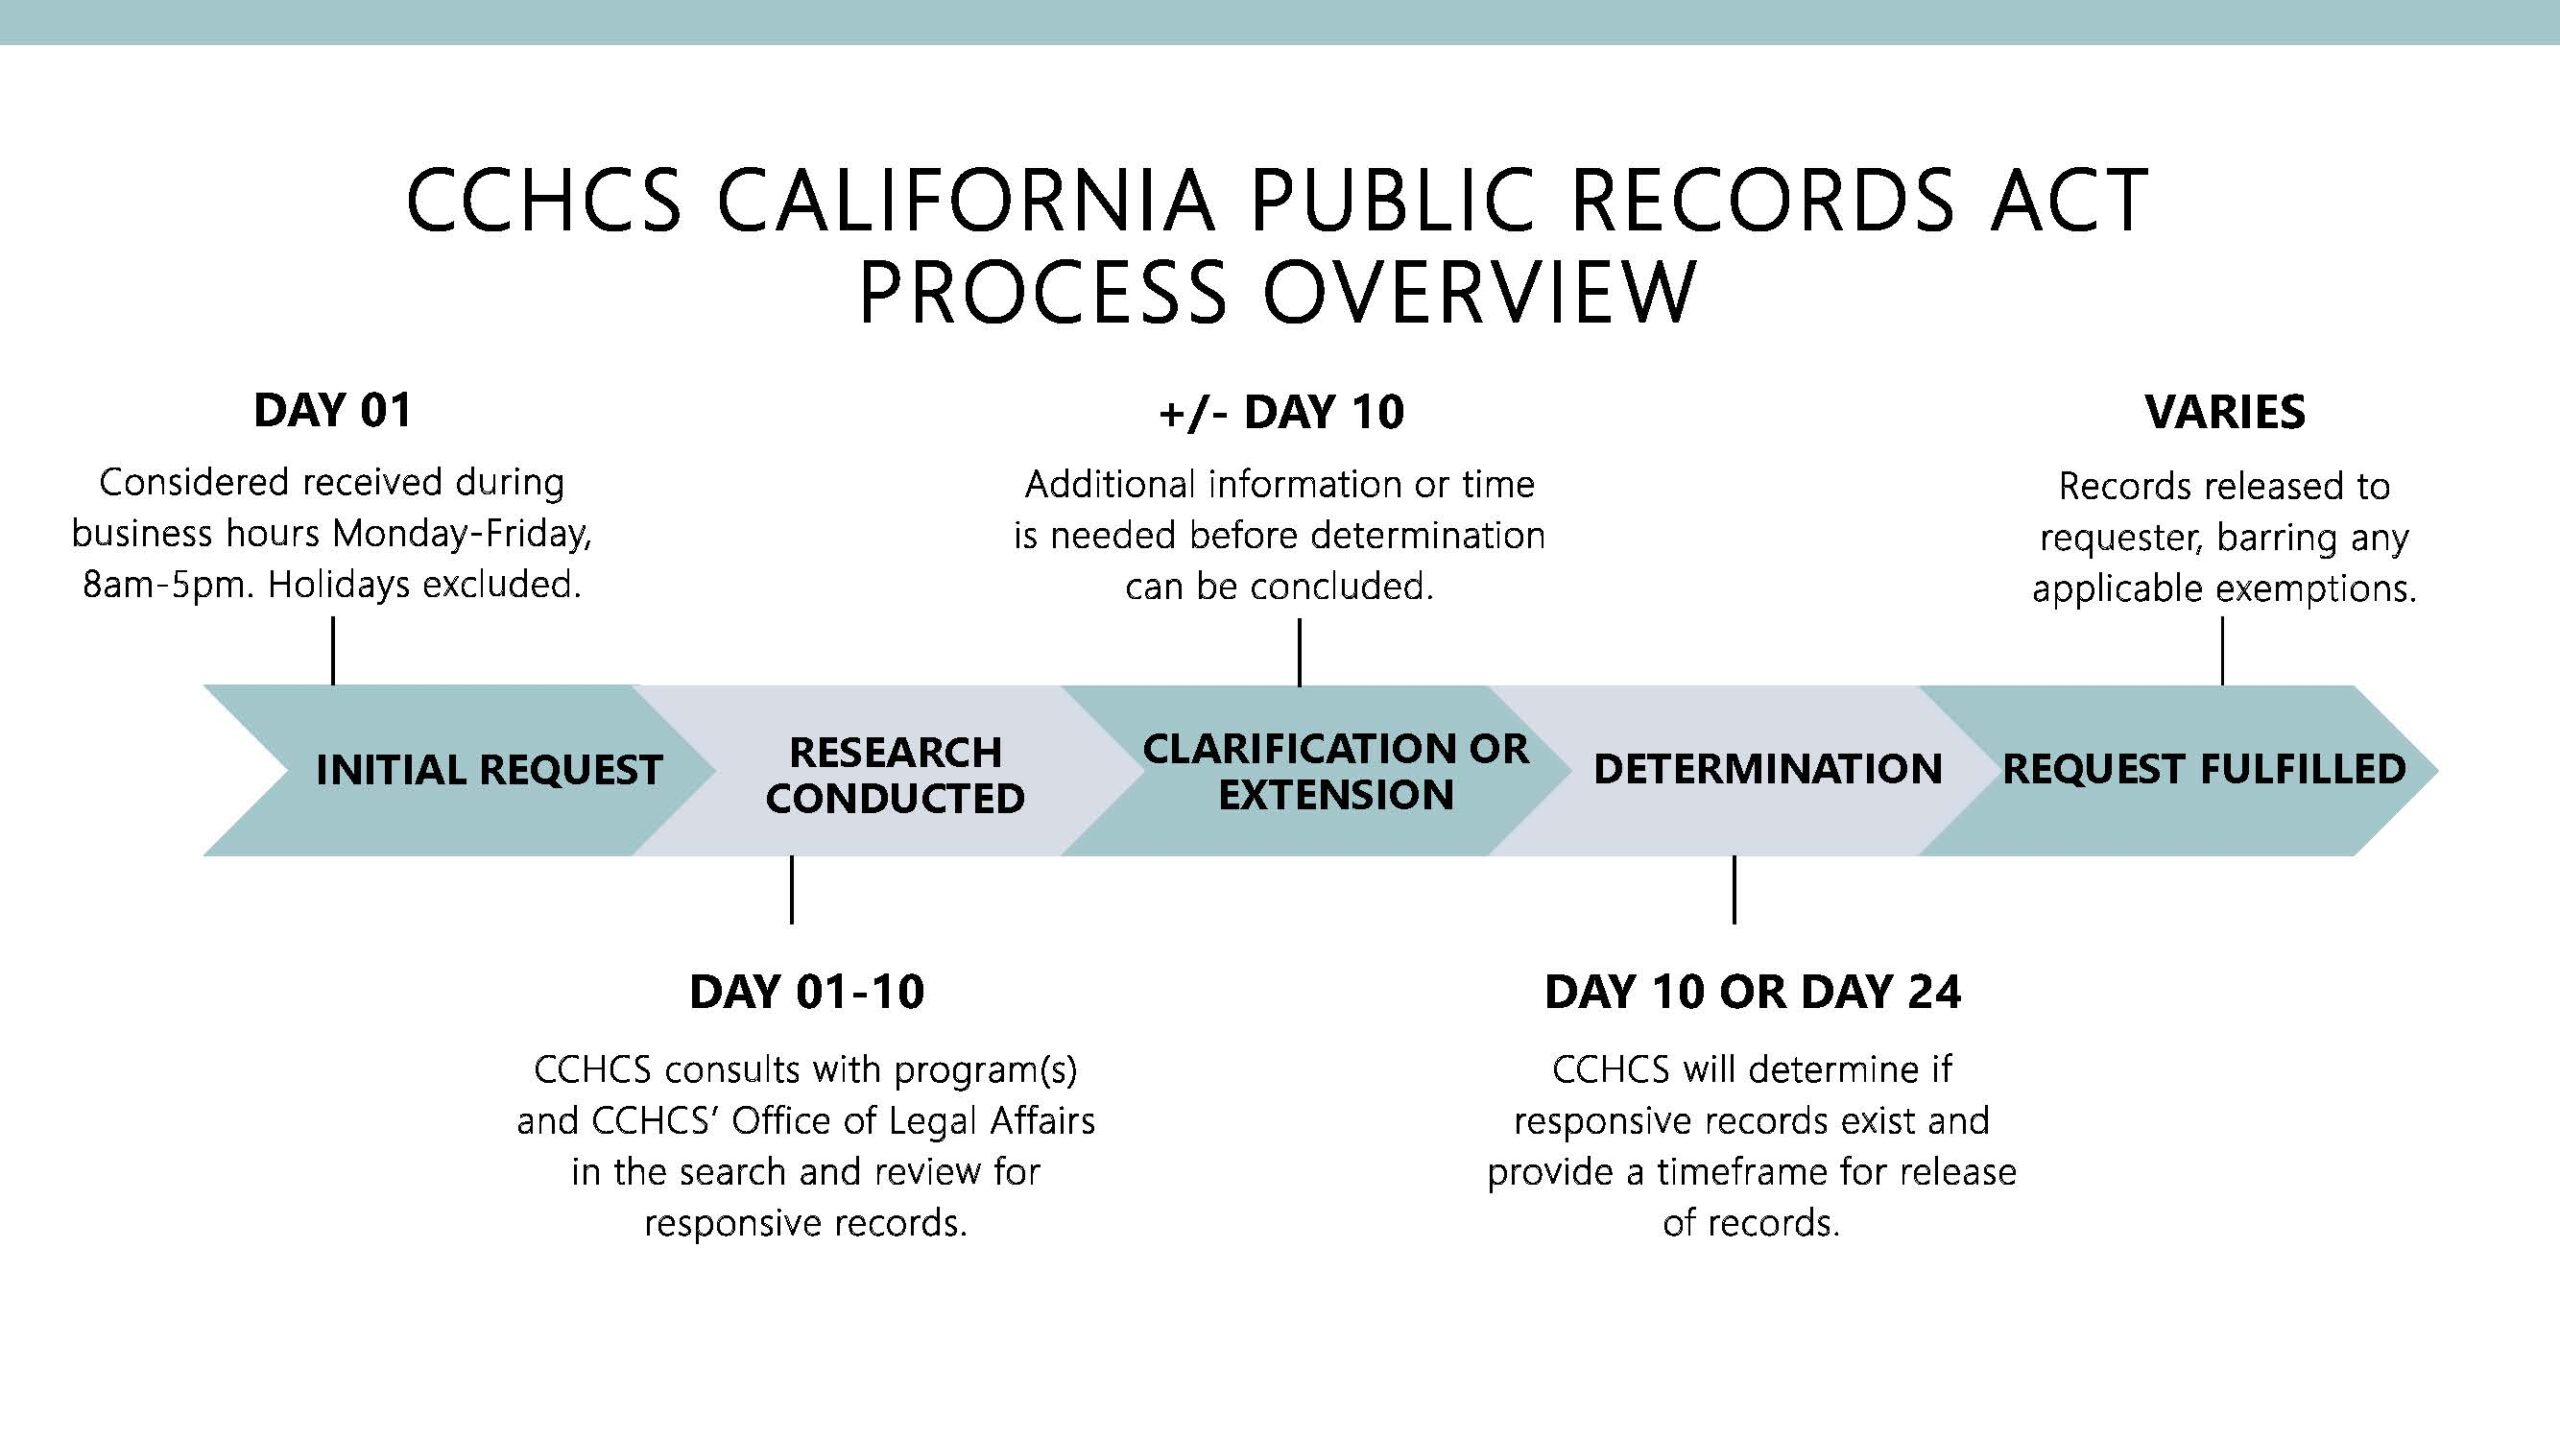 CCHCS California Public Records Act Process Overview. Day 1 is the first day that the request is considered received during business hours.  Business hours are Monday through Friday, from 8:00am to 5:00pm, excluding holidays.  From day 1 to day 10, researched is conducted. CCHCS consults with programs and CCHCS’ Office of Legal Affairs in the search for and review of responsive records. By day 10, a clarification or extension notice may be sent to the requester if additional information or time is needed to make a determination.  If no clarification or extension is required, a determination will be provided as to whether responsive records exist along with a timeframe for release of records.  If an extension is required, the aforementioned determination will be provided by day 24.  The request is considered fulfilled once the responsive records or exemption is provided to the requester.